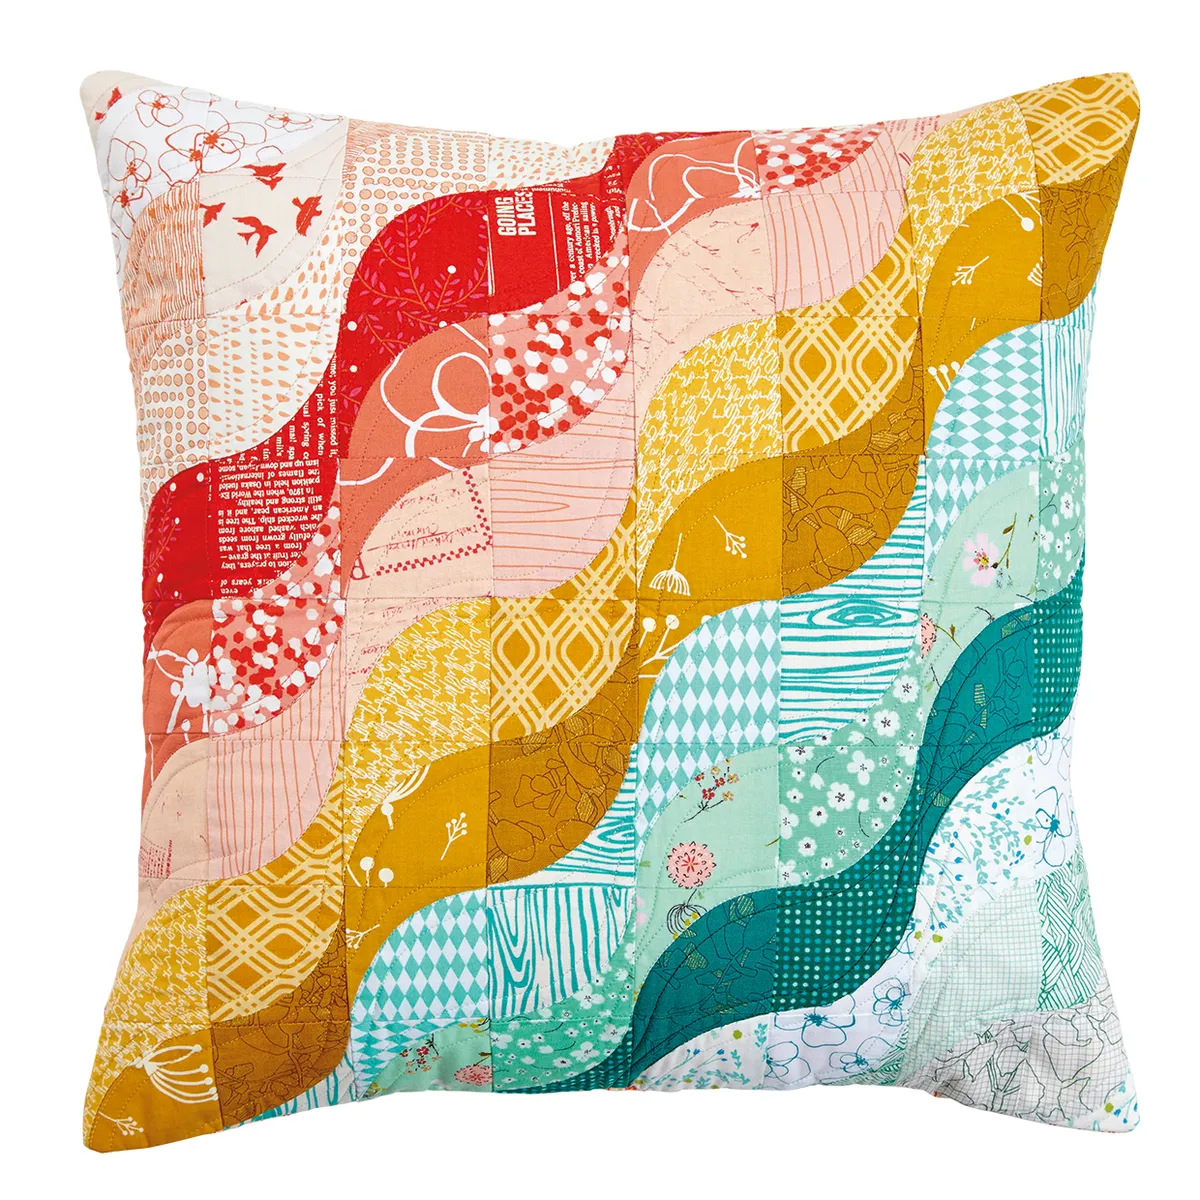 Curved patchwork cushion pattern